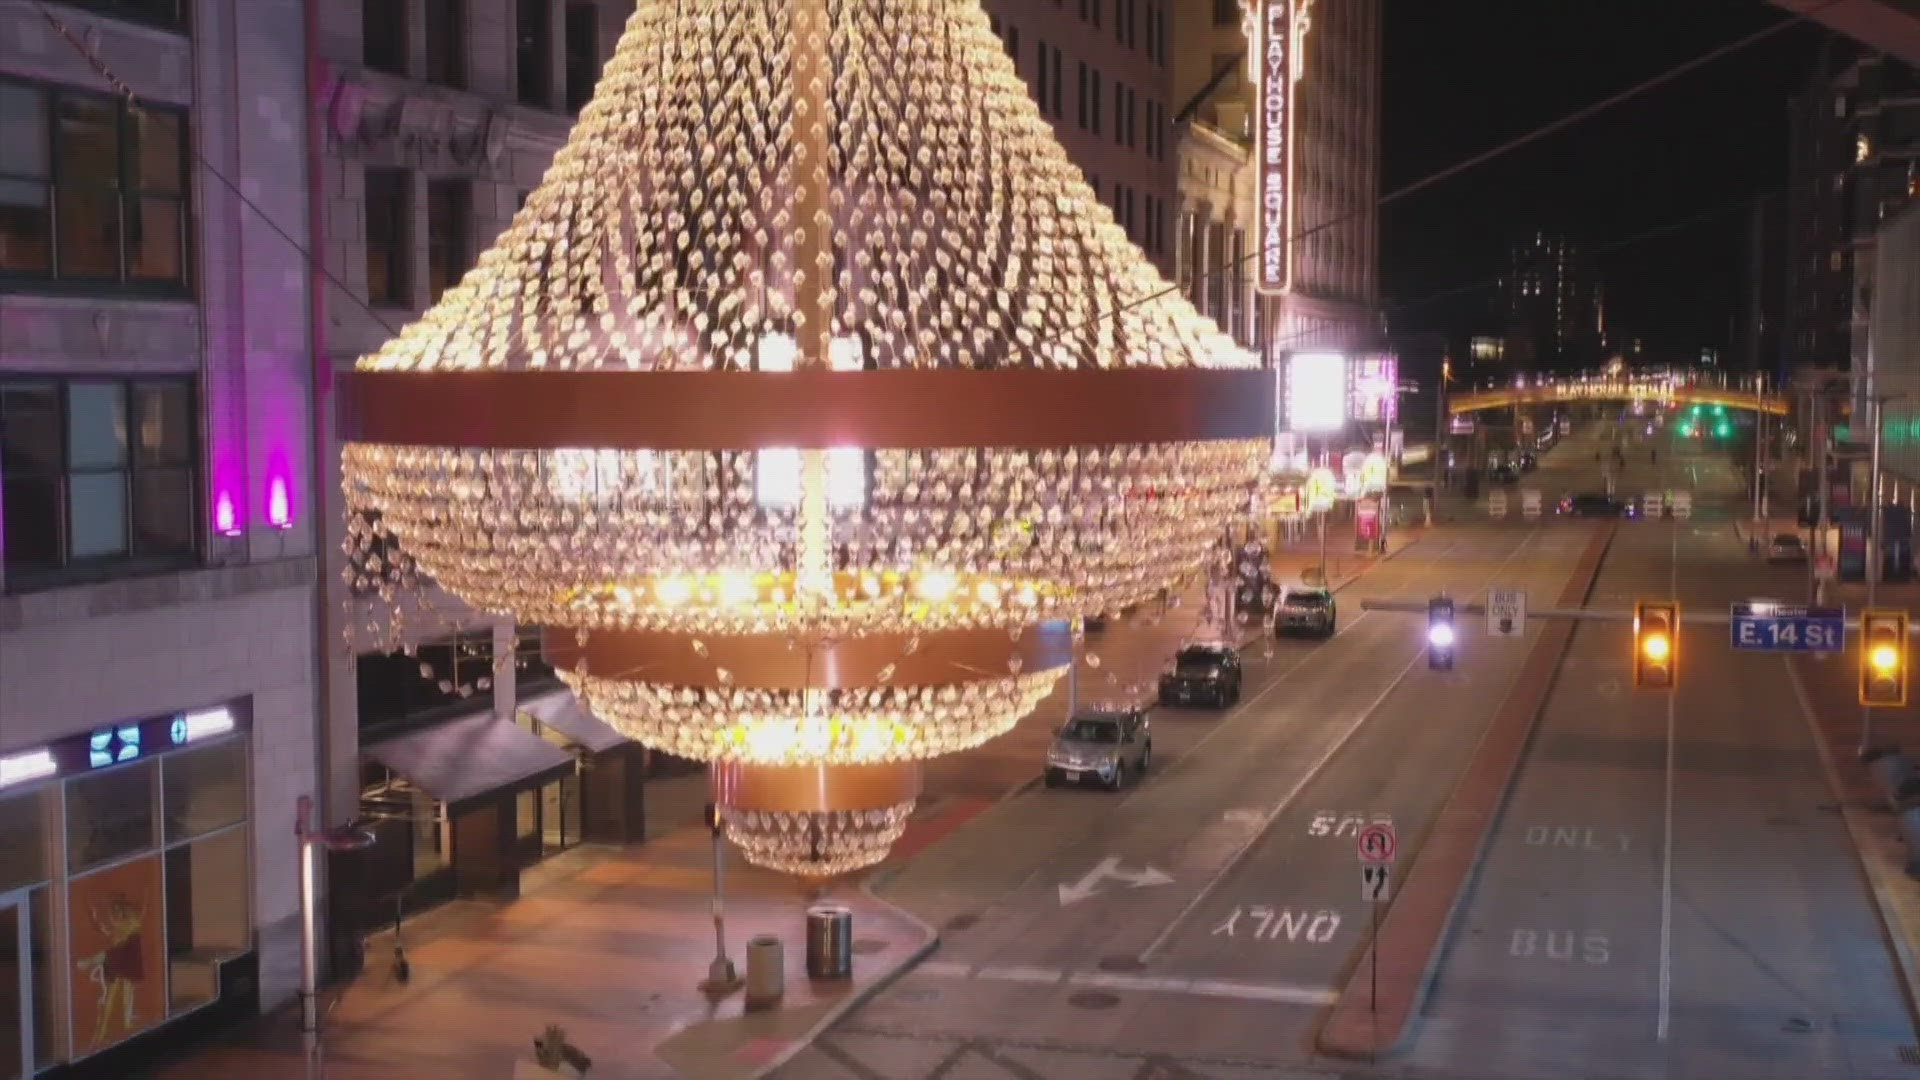 The 48th annual Cleveland International Film Festival will begin Wednesday night at Playhouse Square.